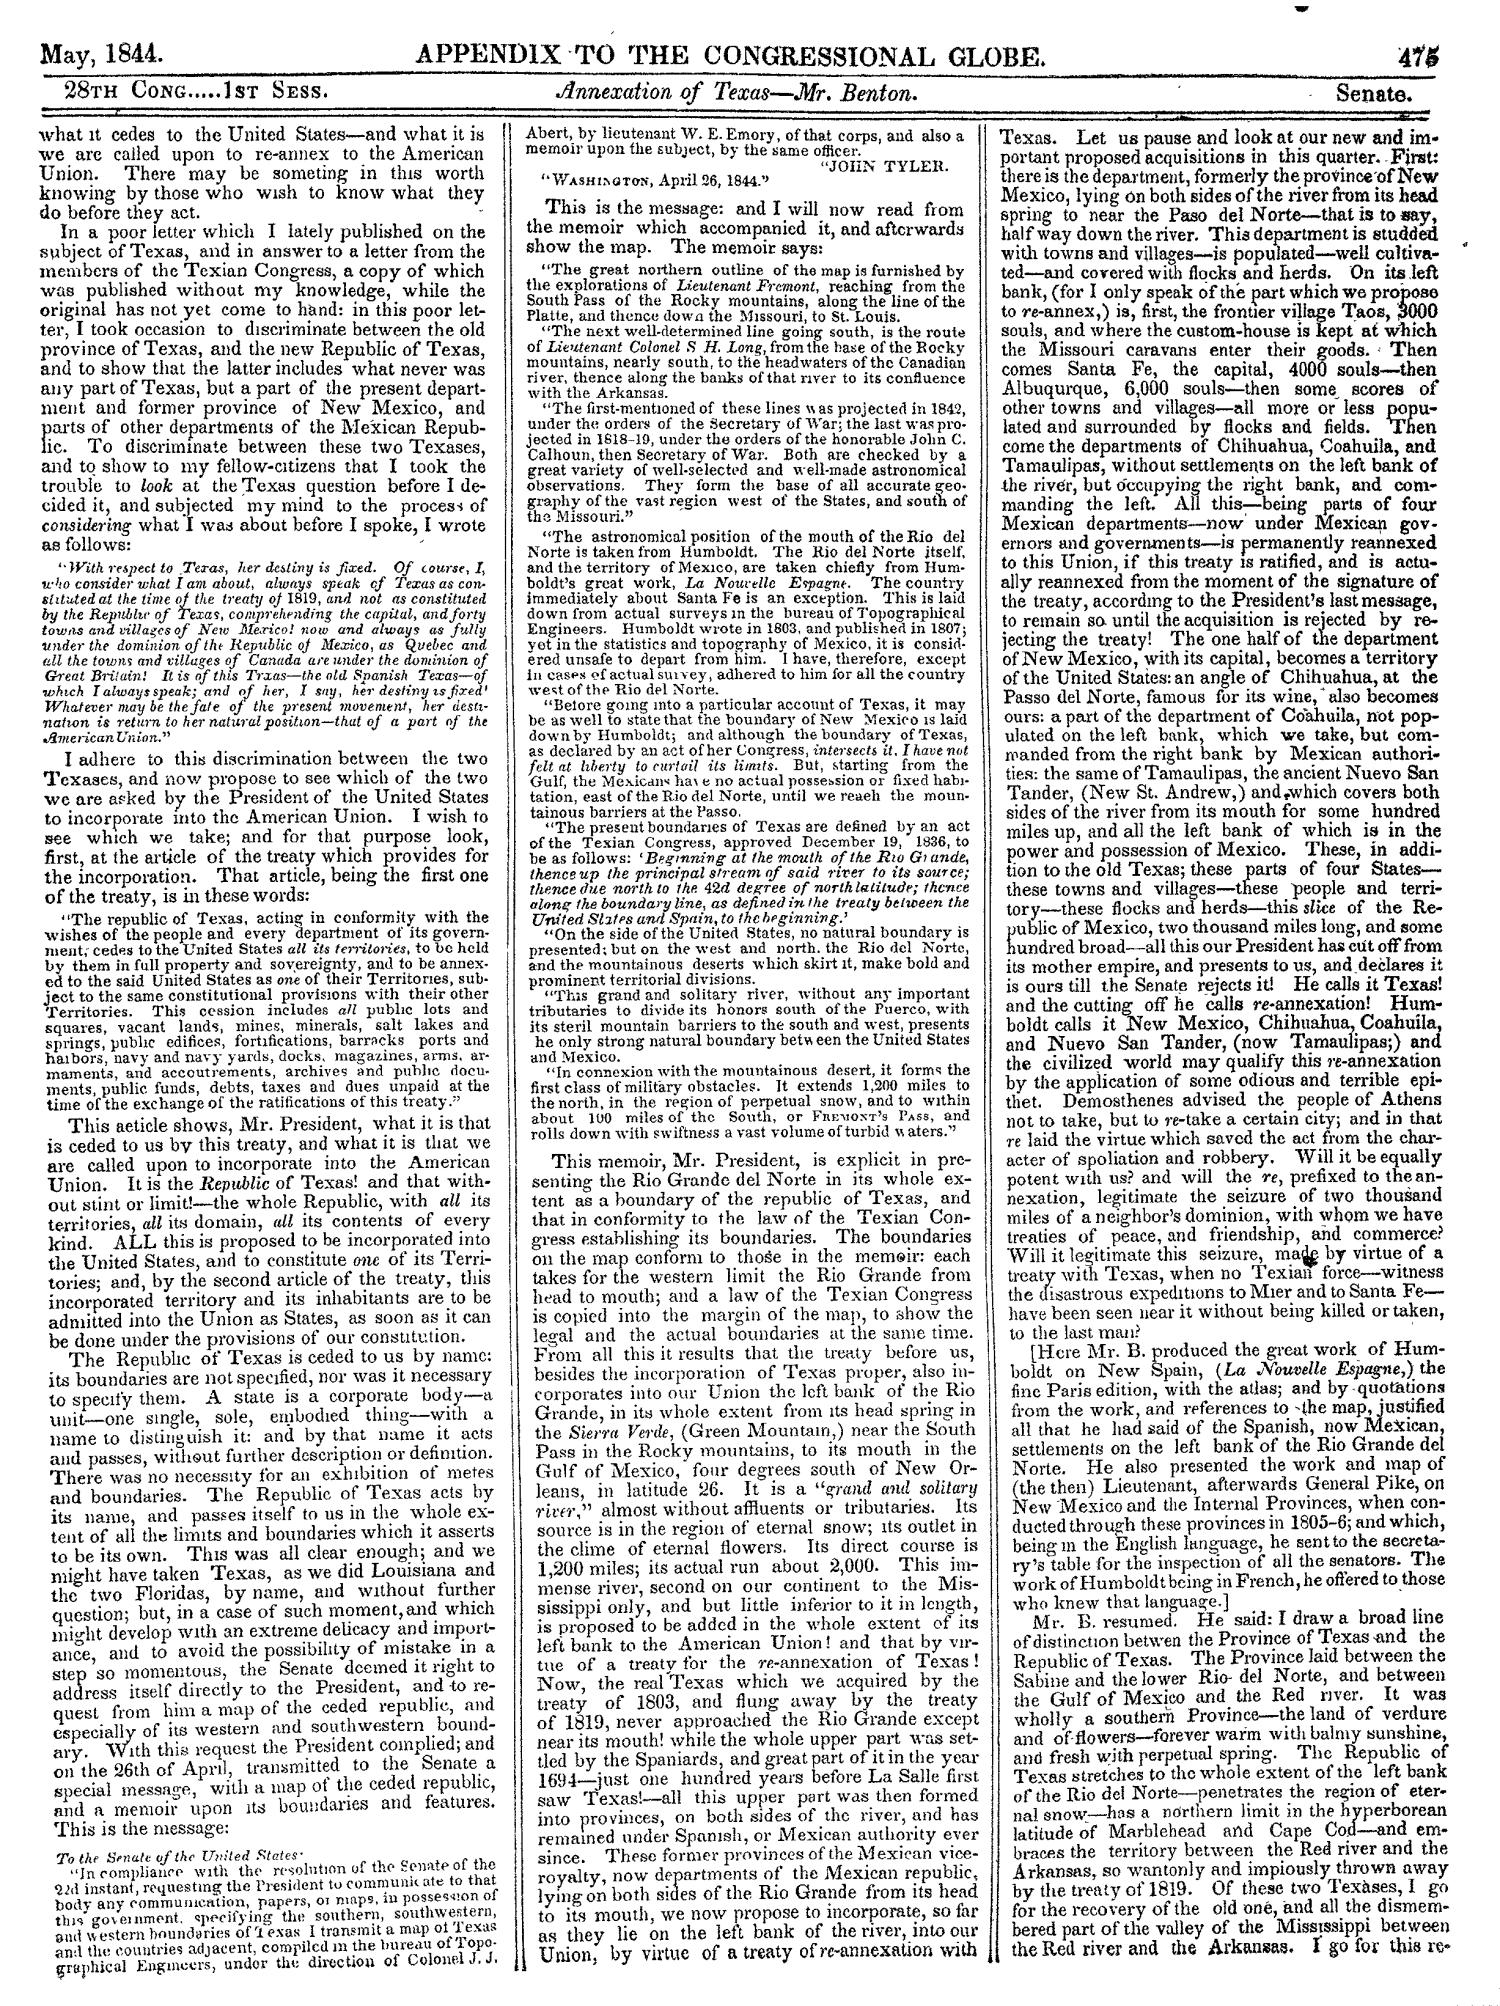 The Congressional Globe, Volume 13, Part 2: Twenty-Eighth Congress, First Session
                                                
                                                    475
                                                